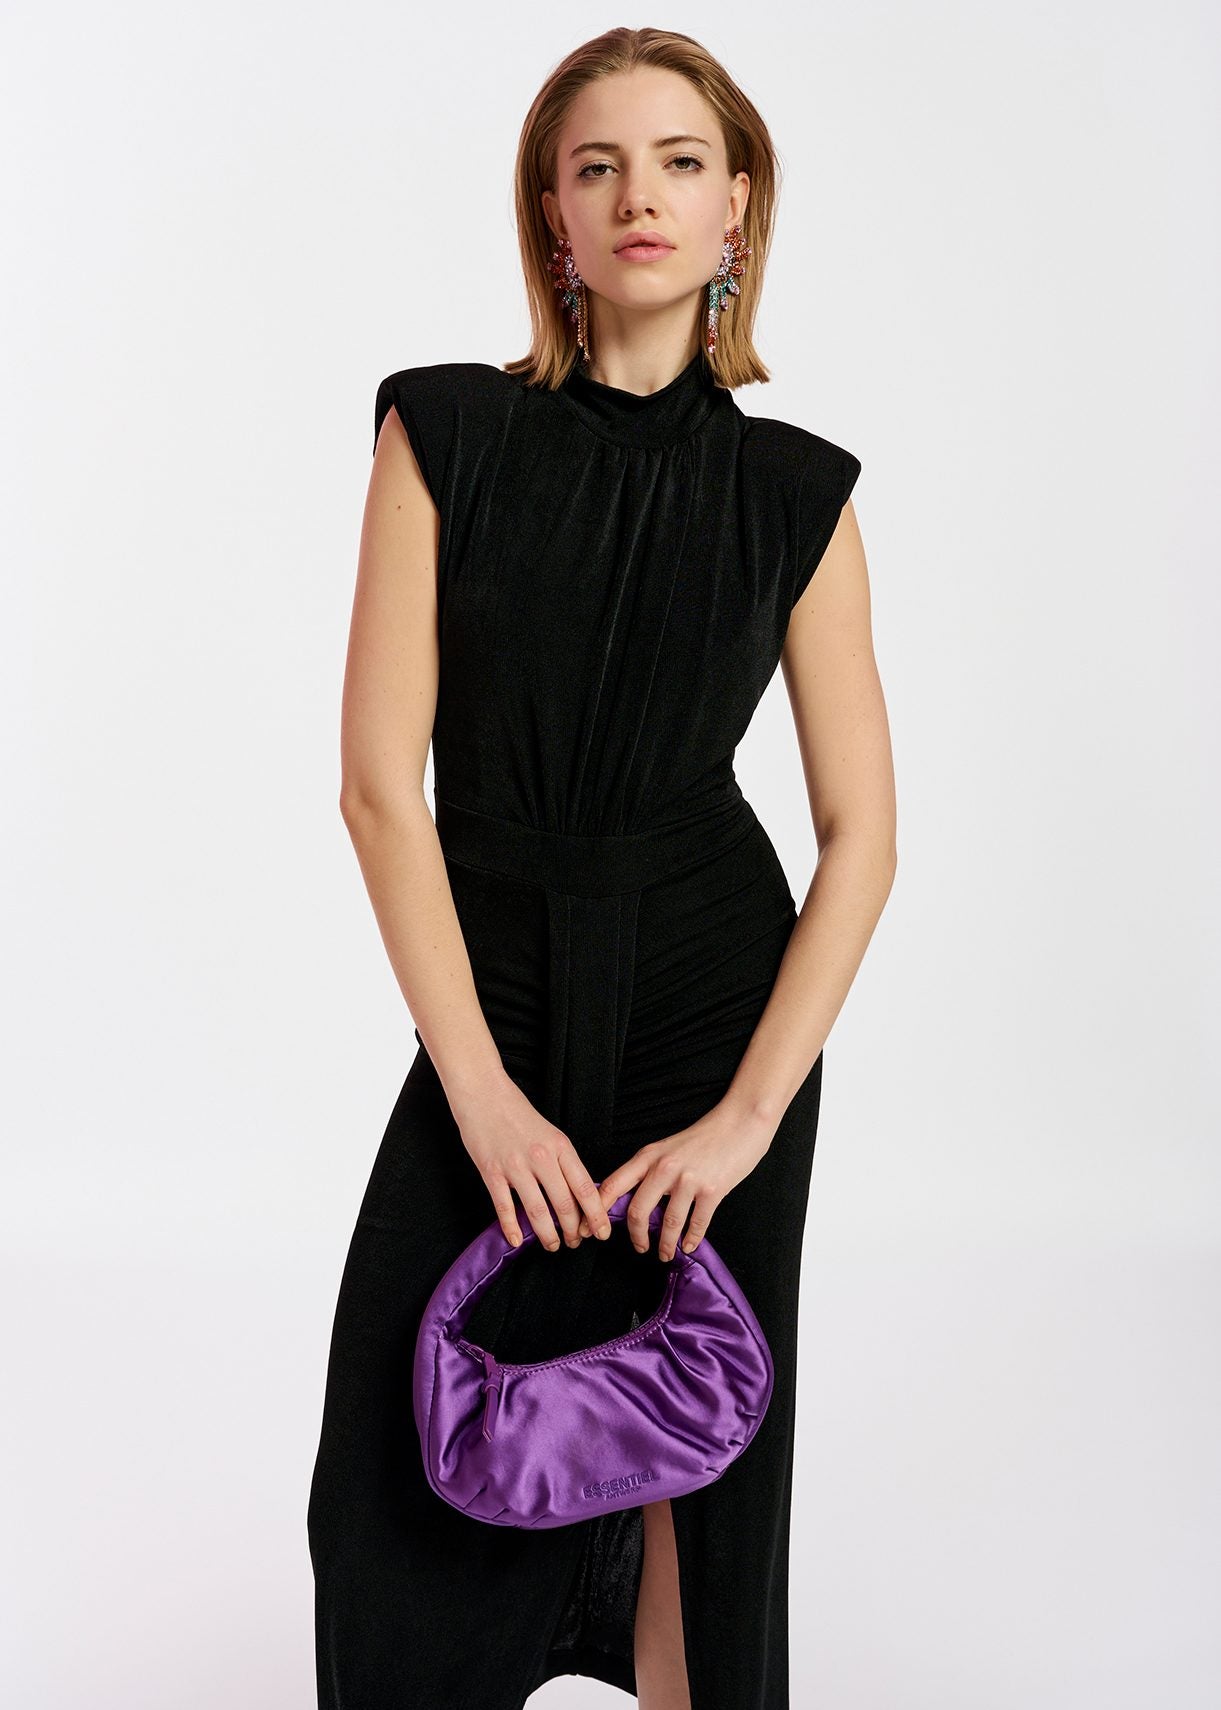 Model wears black midi dress with pleat and slit at front.